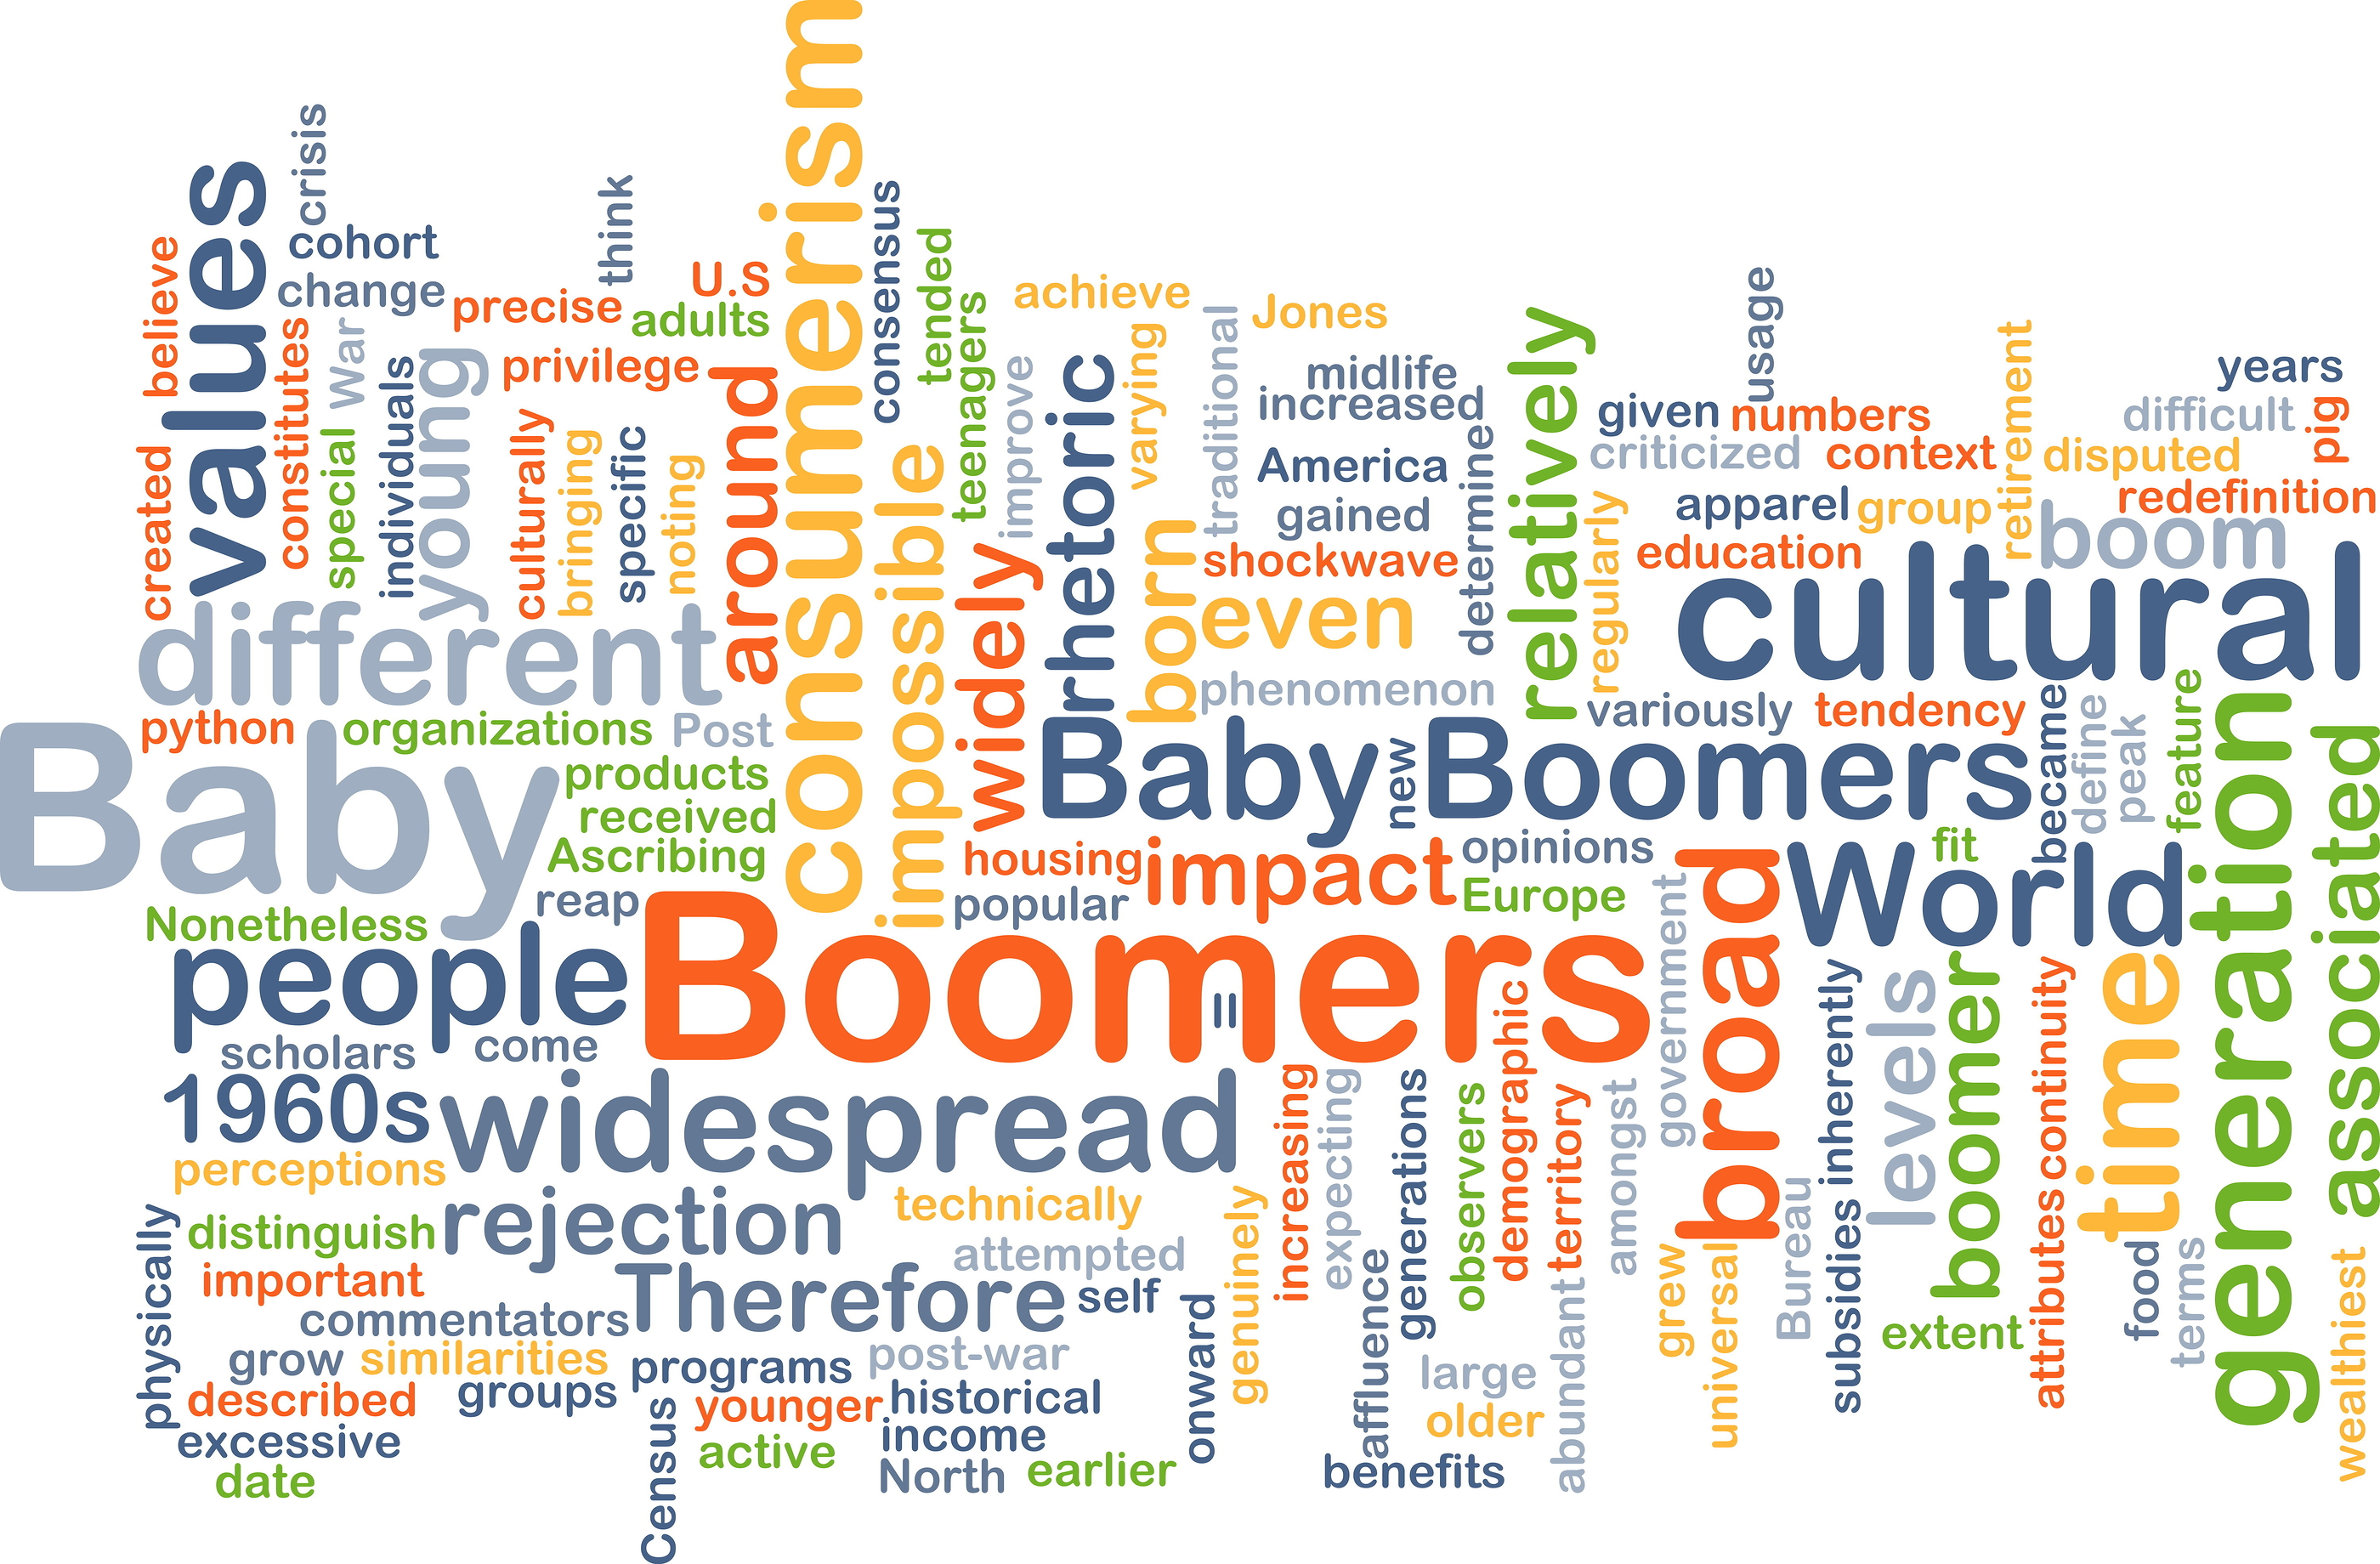 Report: Boomers are snackers